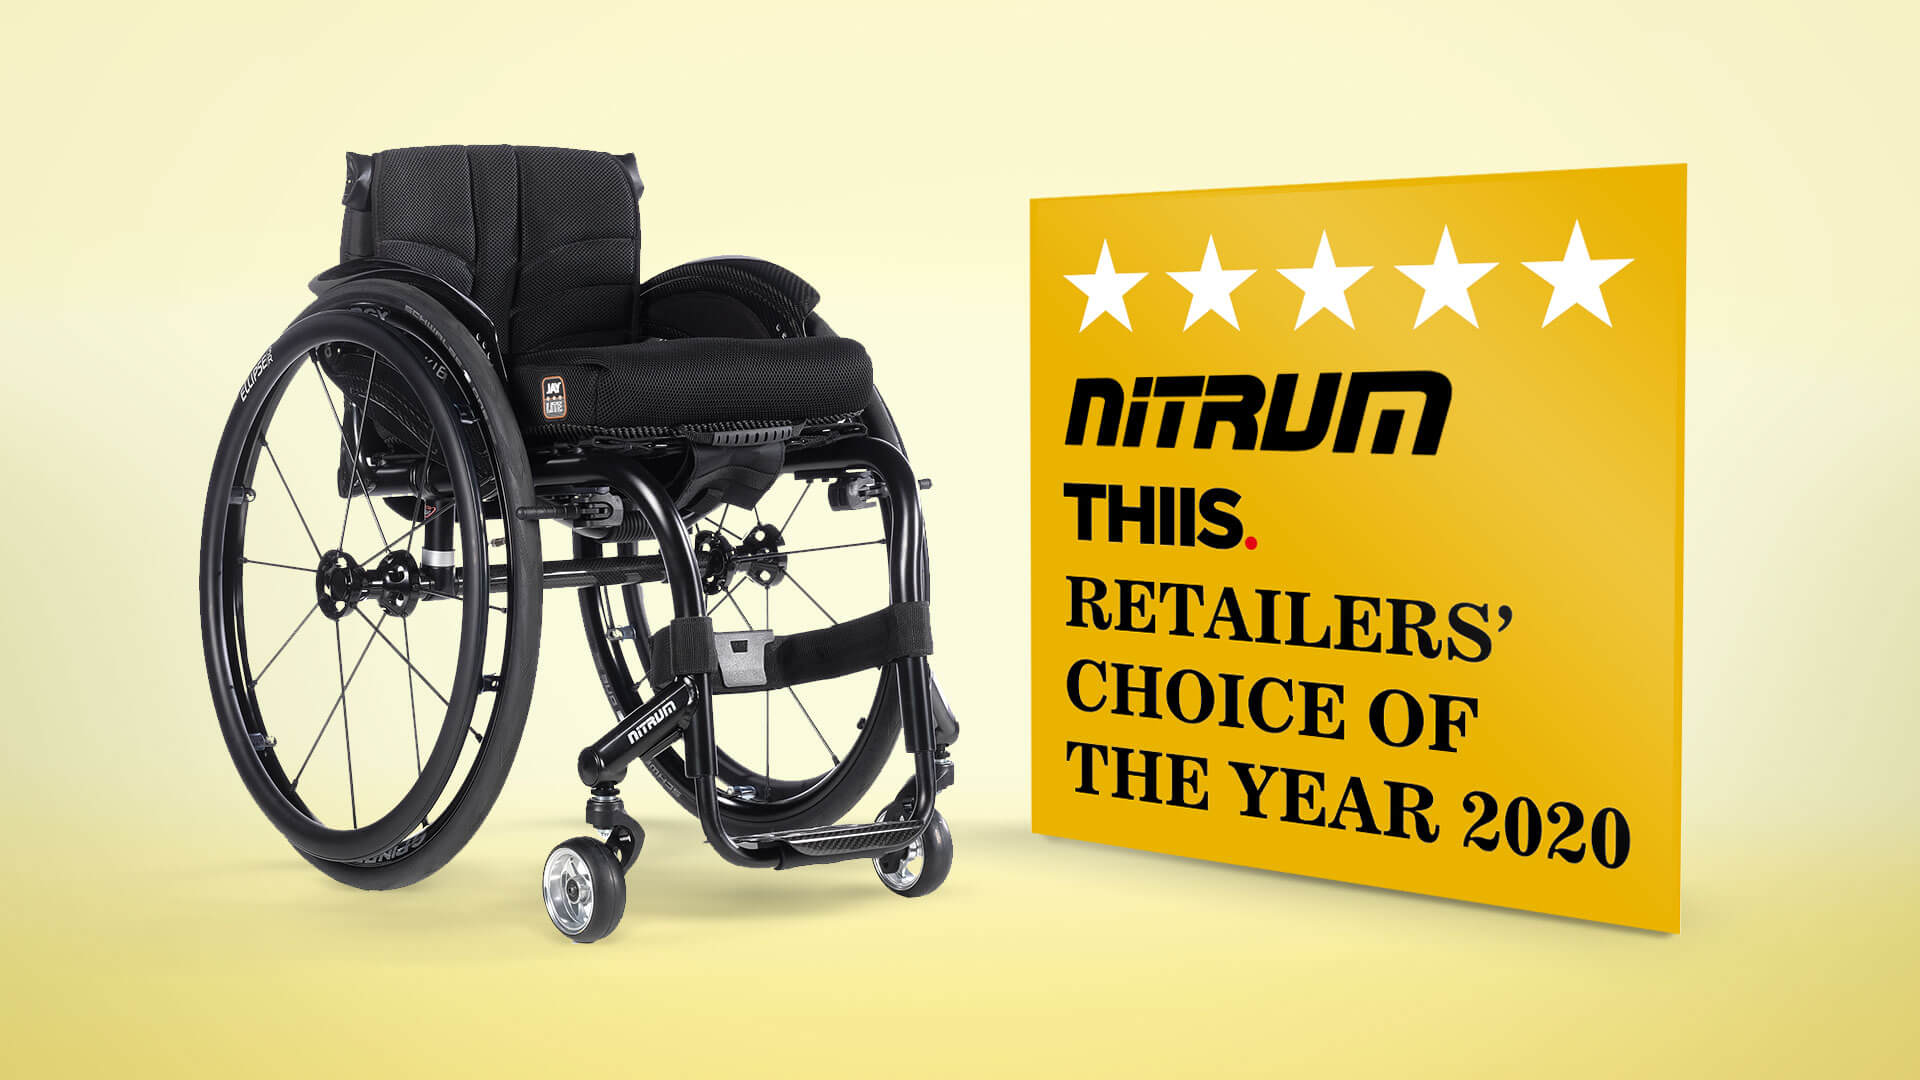 Nitrum Wins Retailer's Choice of the Year 2020 award in the UK!